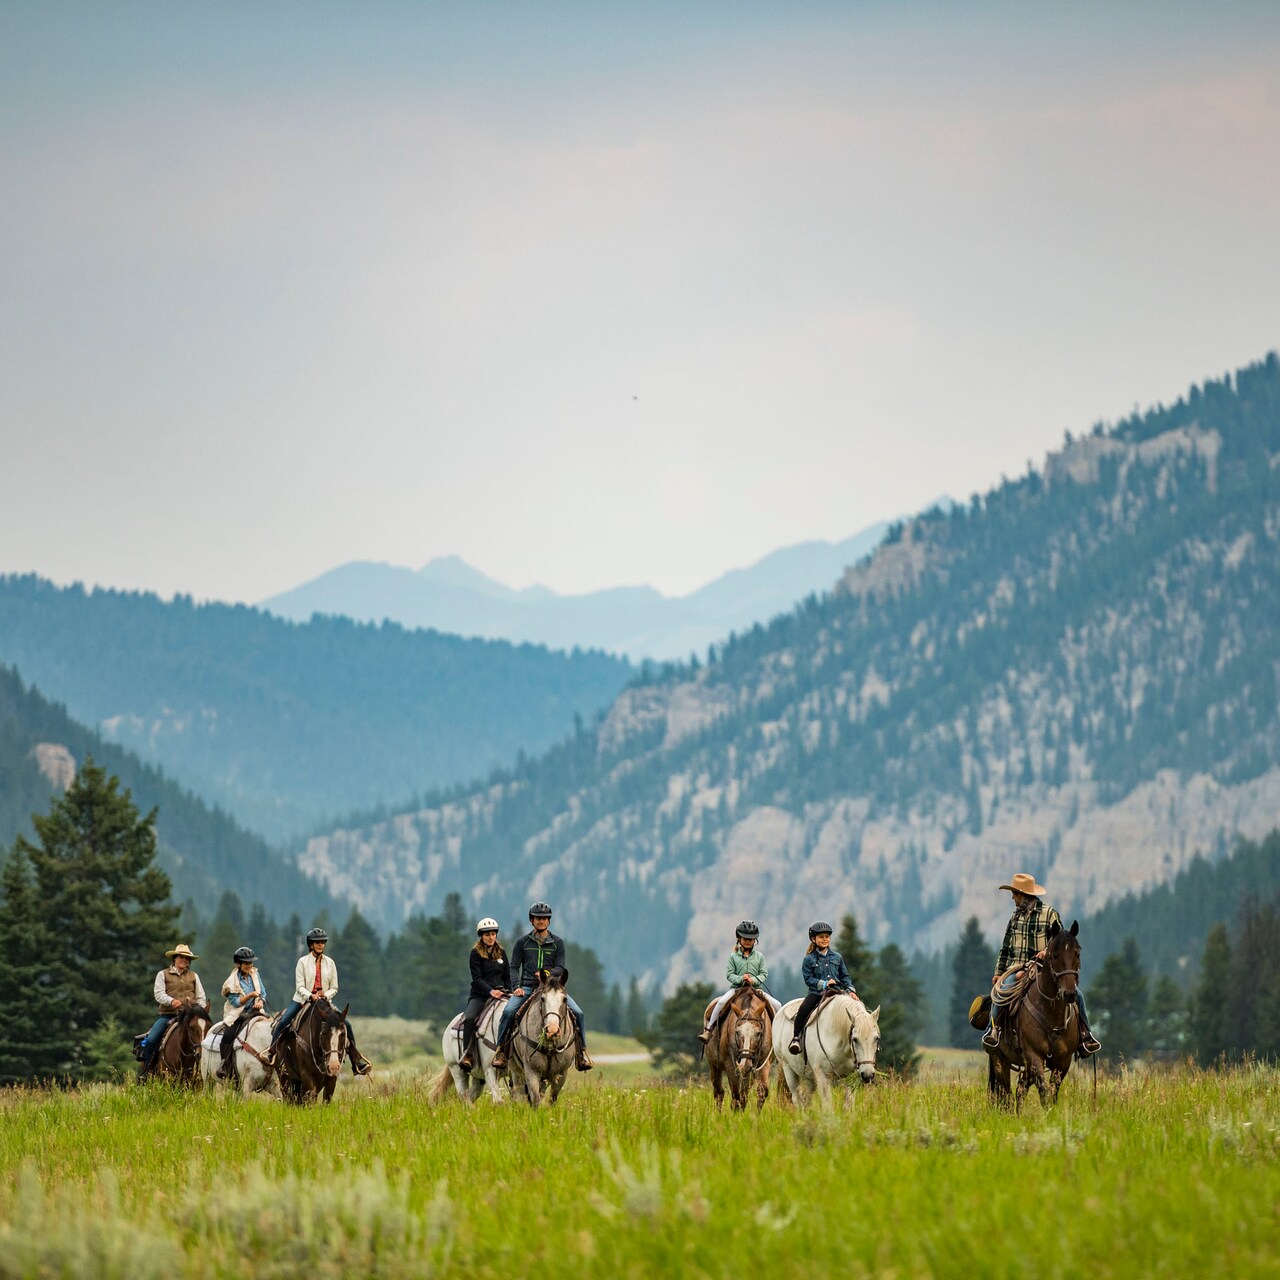 A group of people ride horses on the grassy plain of a mountain valley